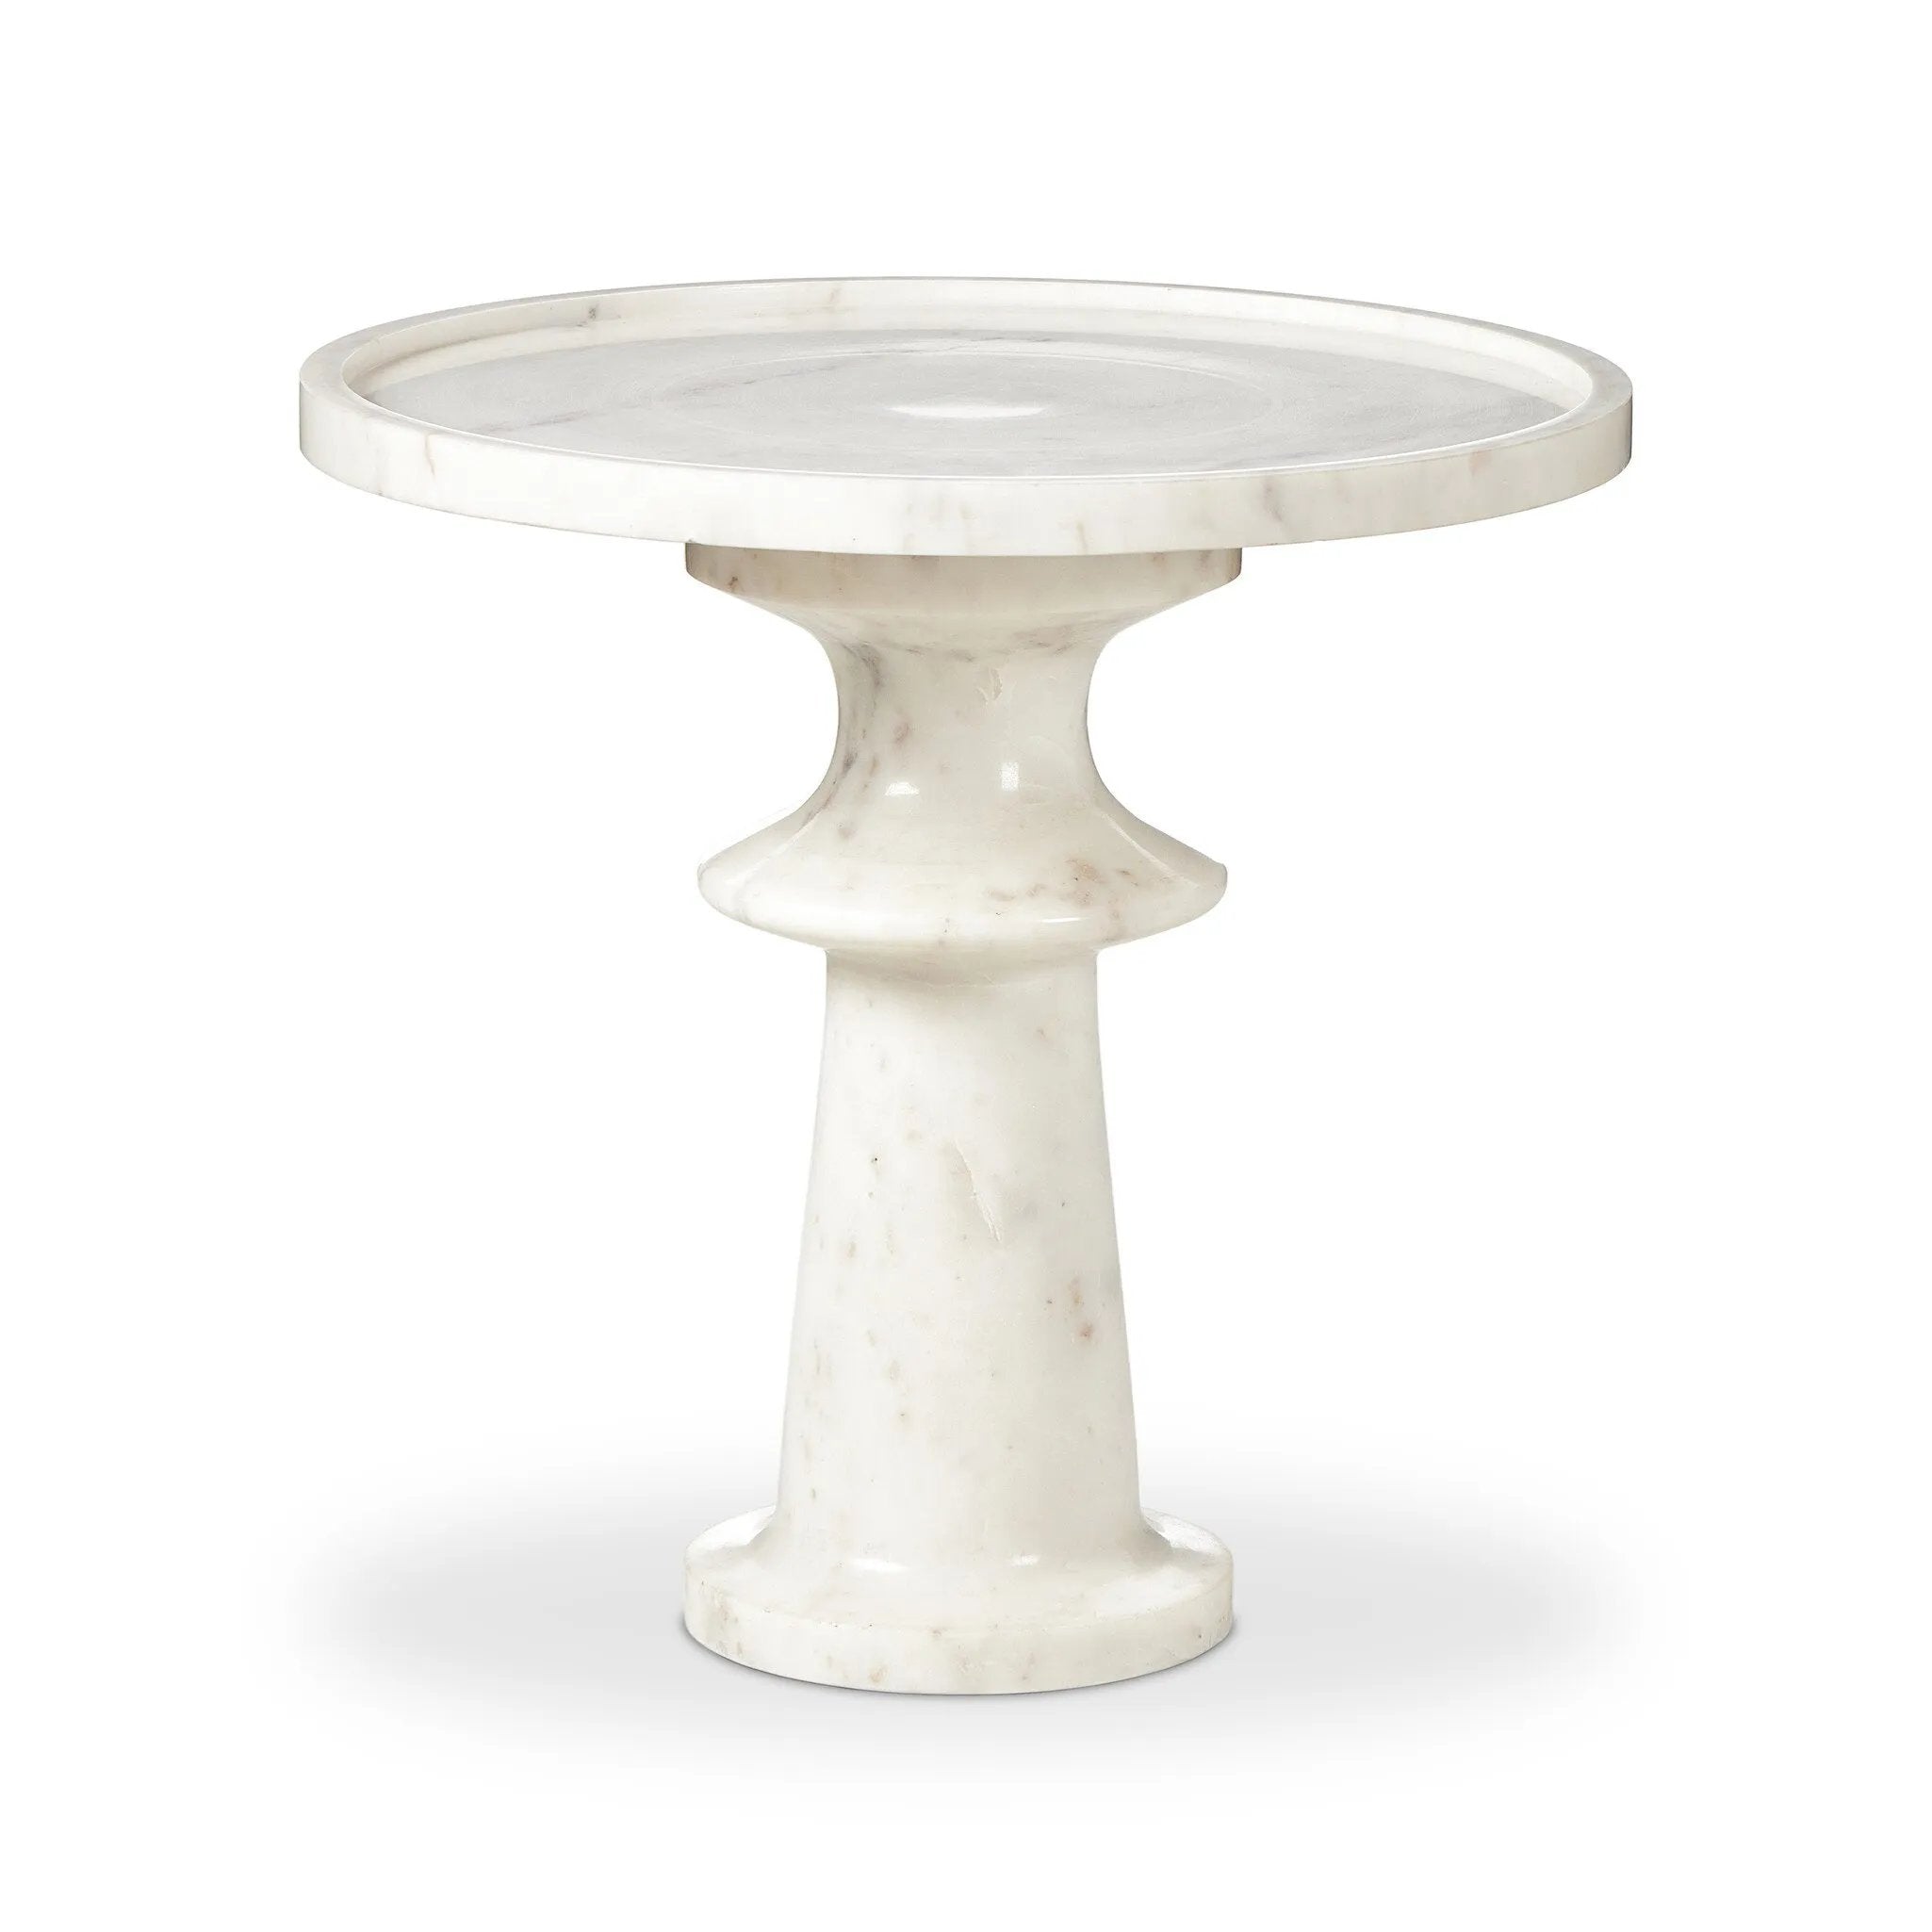 Crafted from solid white marble and shaped into a sculpted silhouette using a lathe. A tray top is perfectly size to keep your favorite drink or book within reach.Collection: Marlo Amethyst Home provides interior design, new home construction design consulting, vintage area rugs, and lighting in the Tampa metro area.